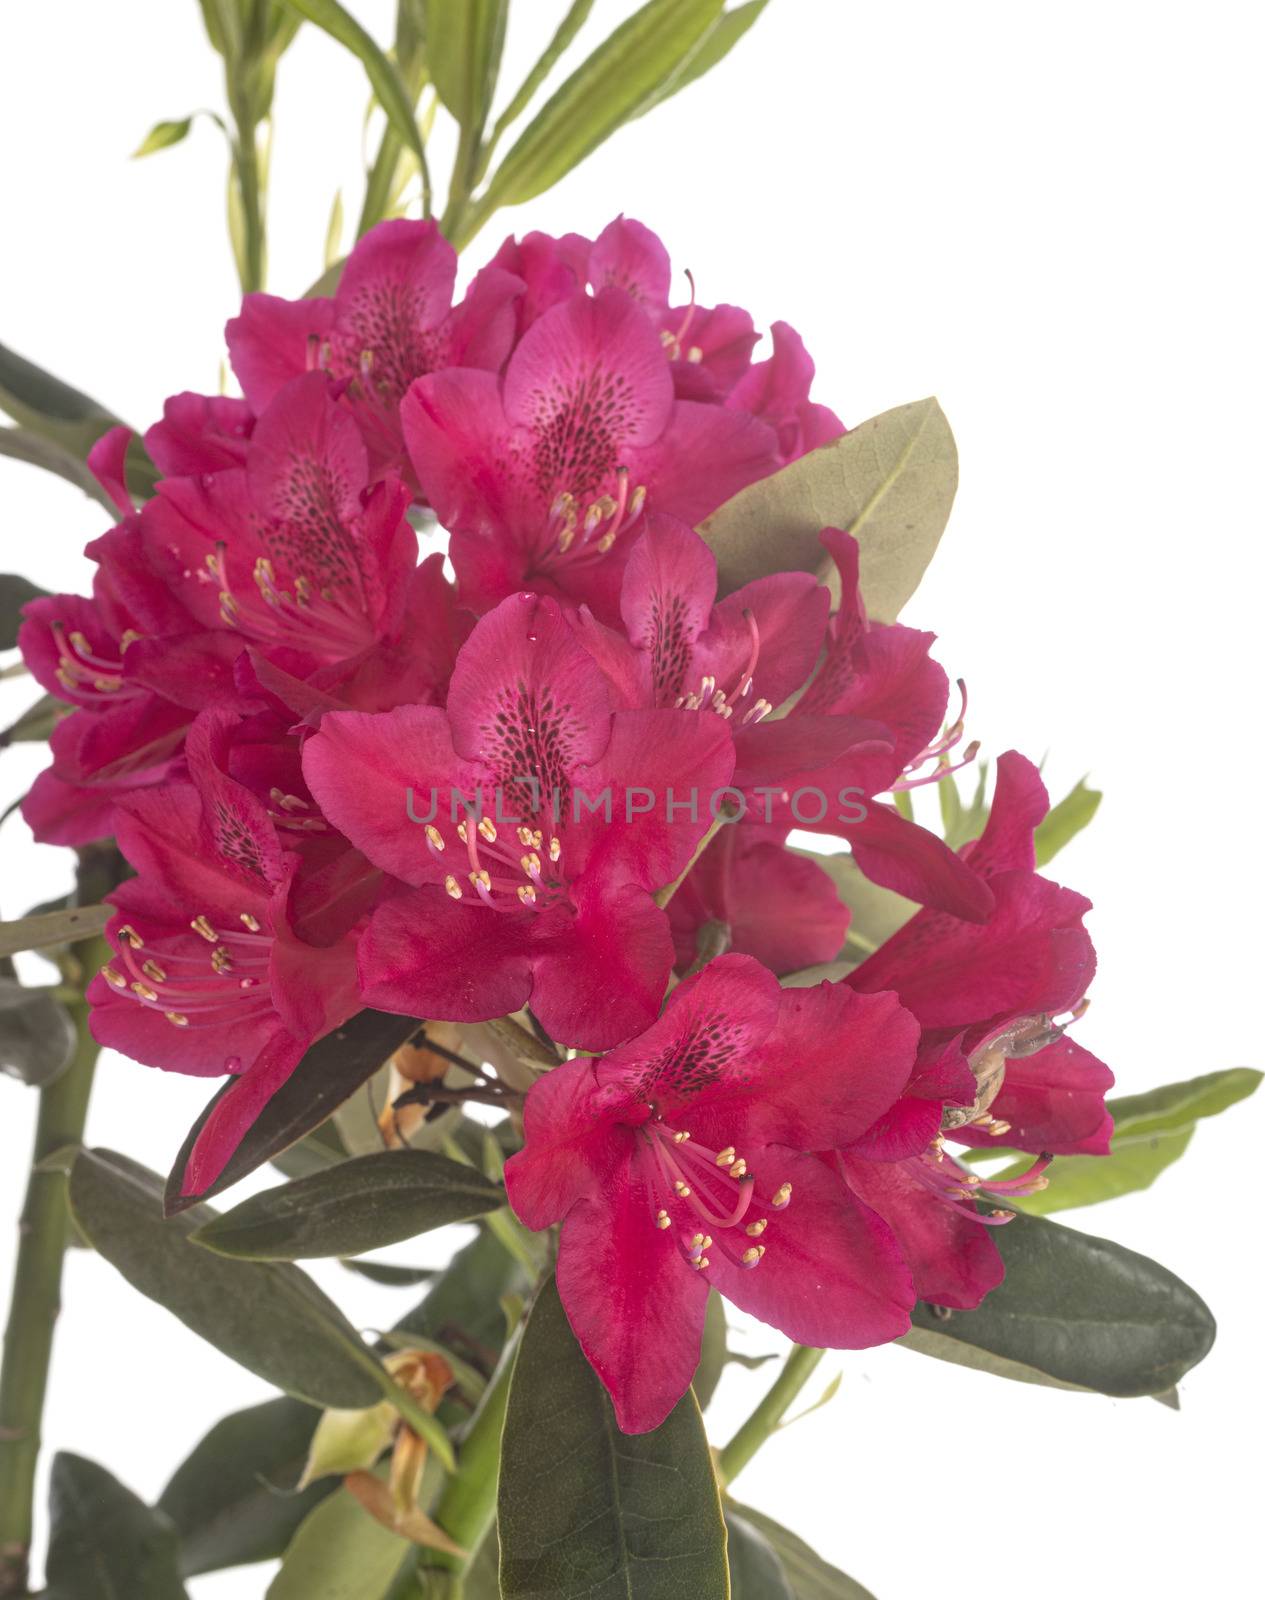 Rhododendron in studio by cynoclub